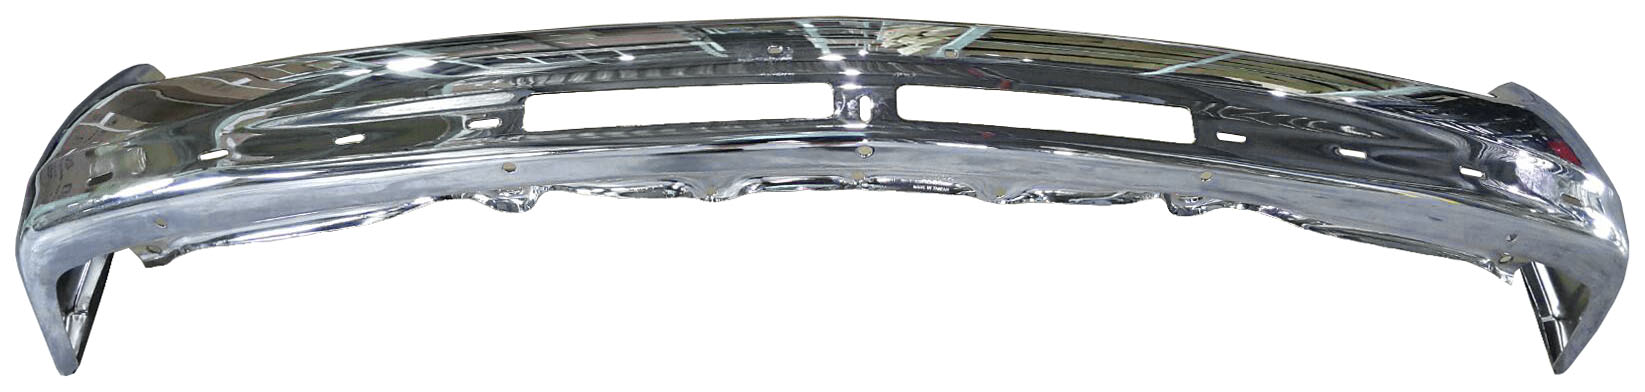 Aftermarket METAL FRONT BUMPERS for CHEVROLET - SILVERADO 2500 HD, SILVERADO 2500 HD,01-02,Front bumper face bar